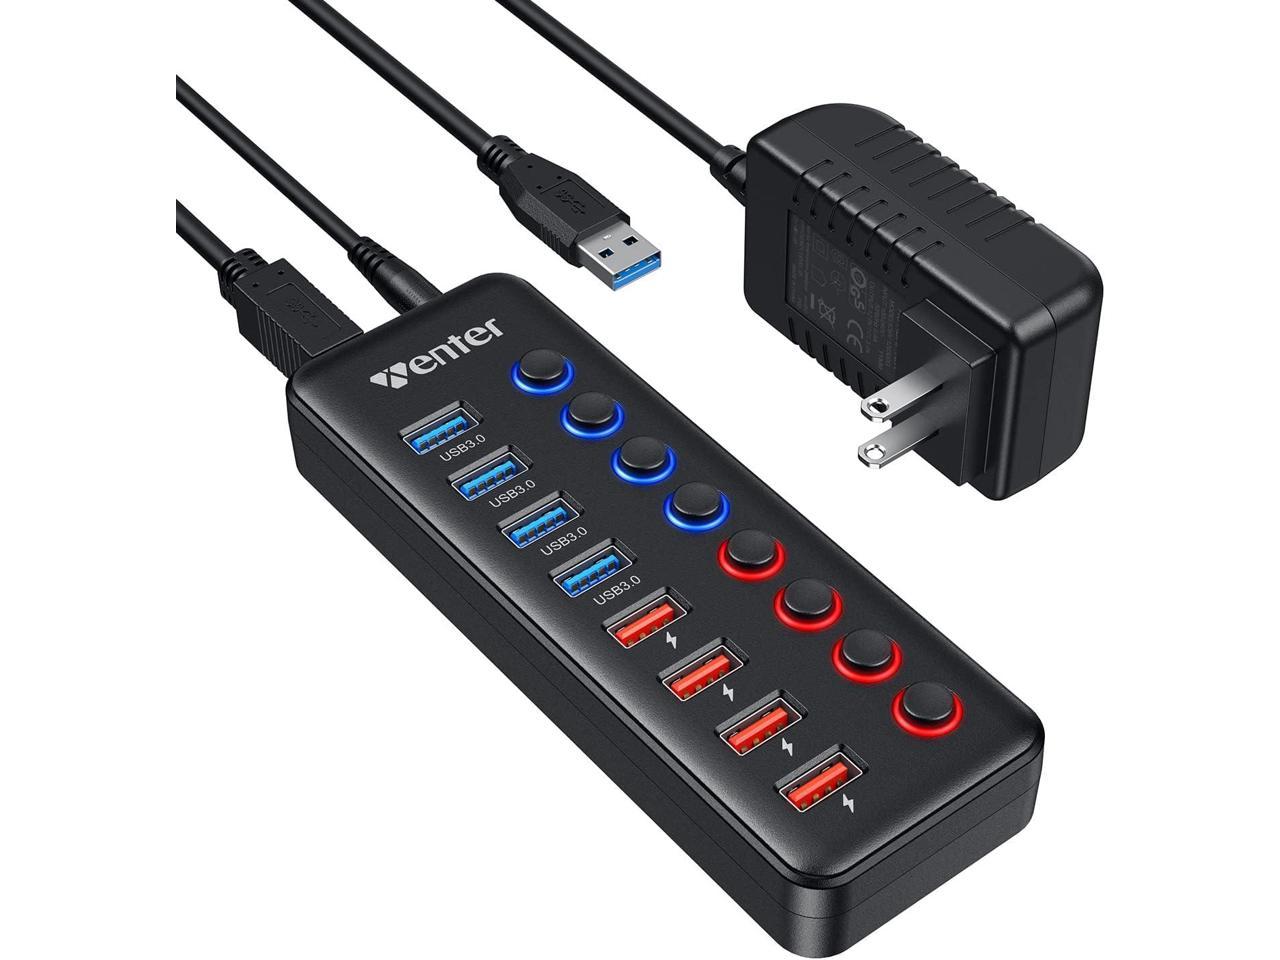 Powered Usb Hub Wenter 8 Port Usb Data Hub Splitter 4 Usb 3 0 Data Ports 4 Smart Charging Port With Individual On Off Switches And 12v 3a Power Adapter For Windows Laptop And More Newegg Com